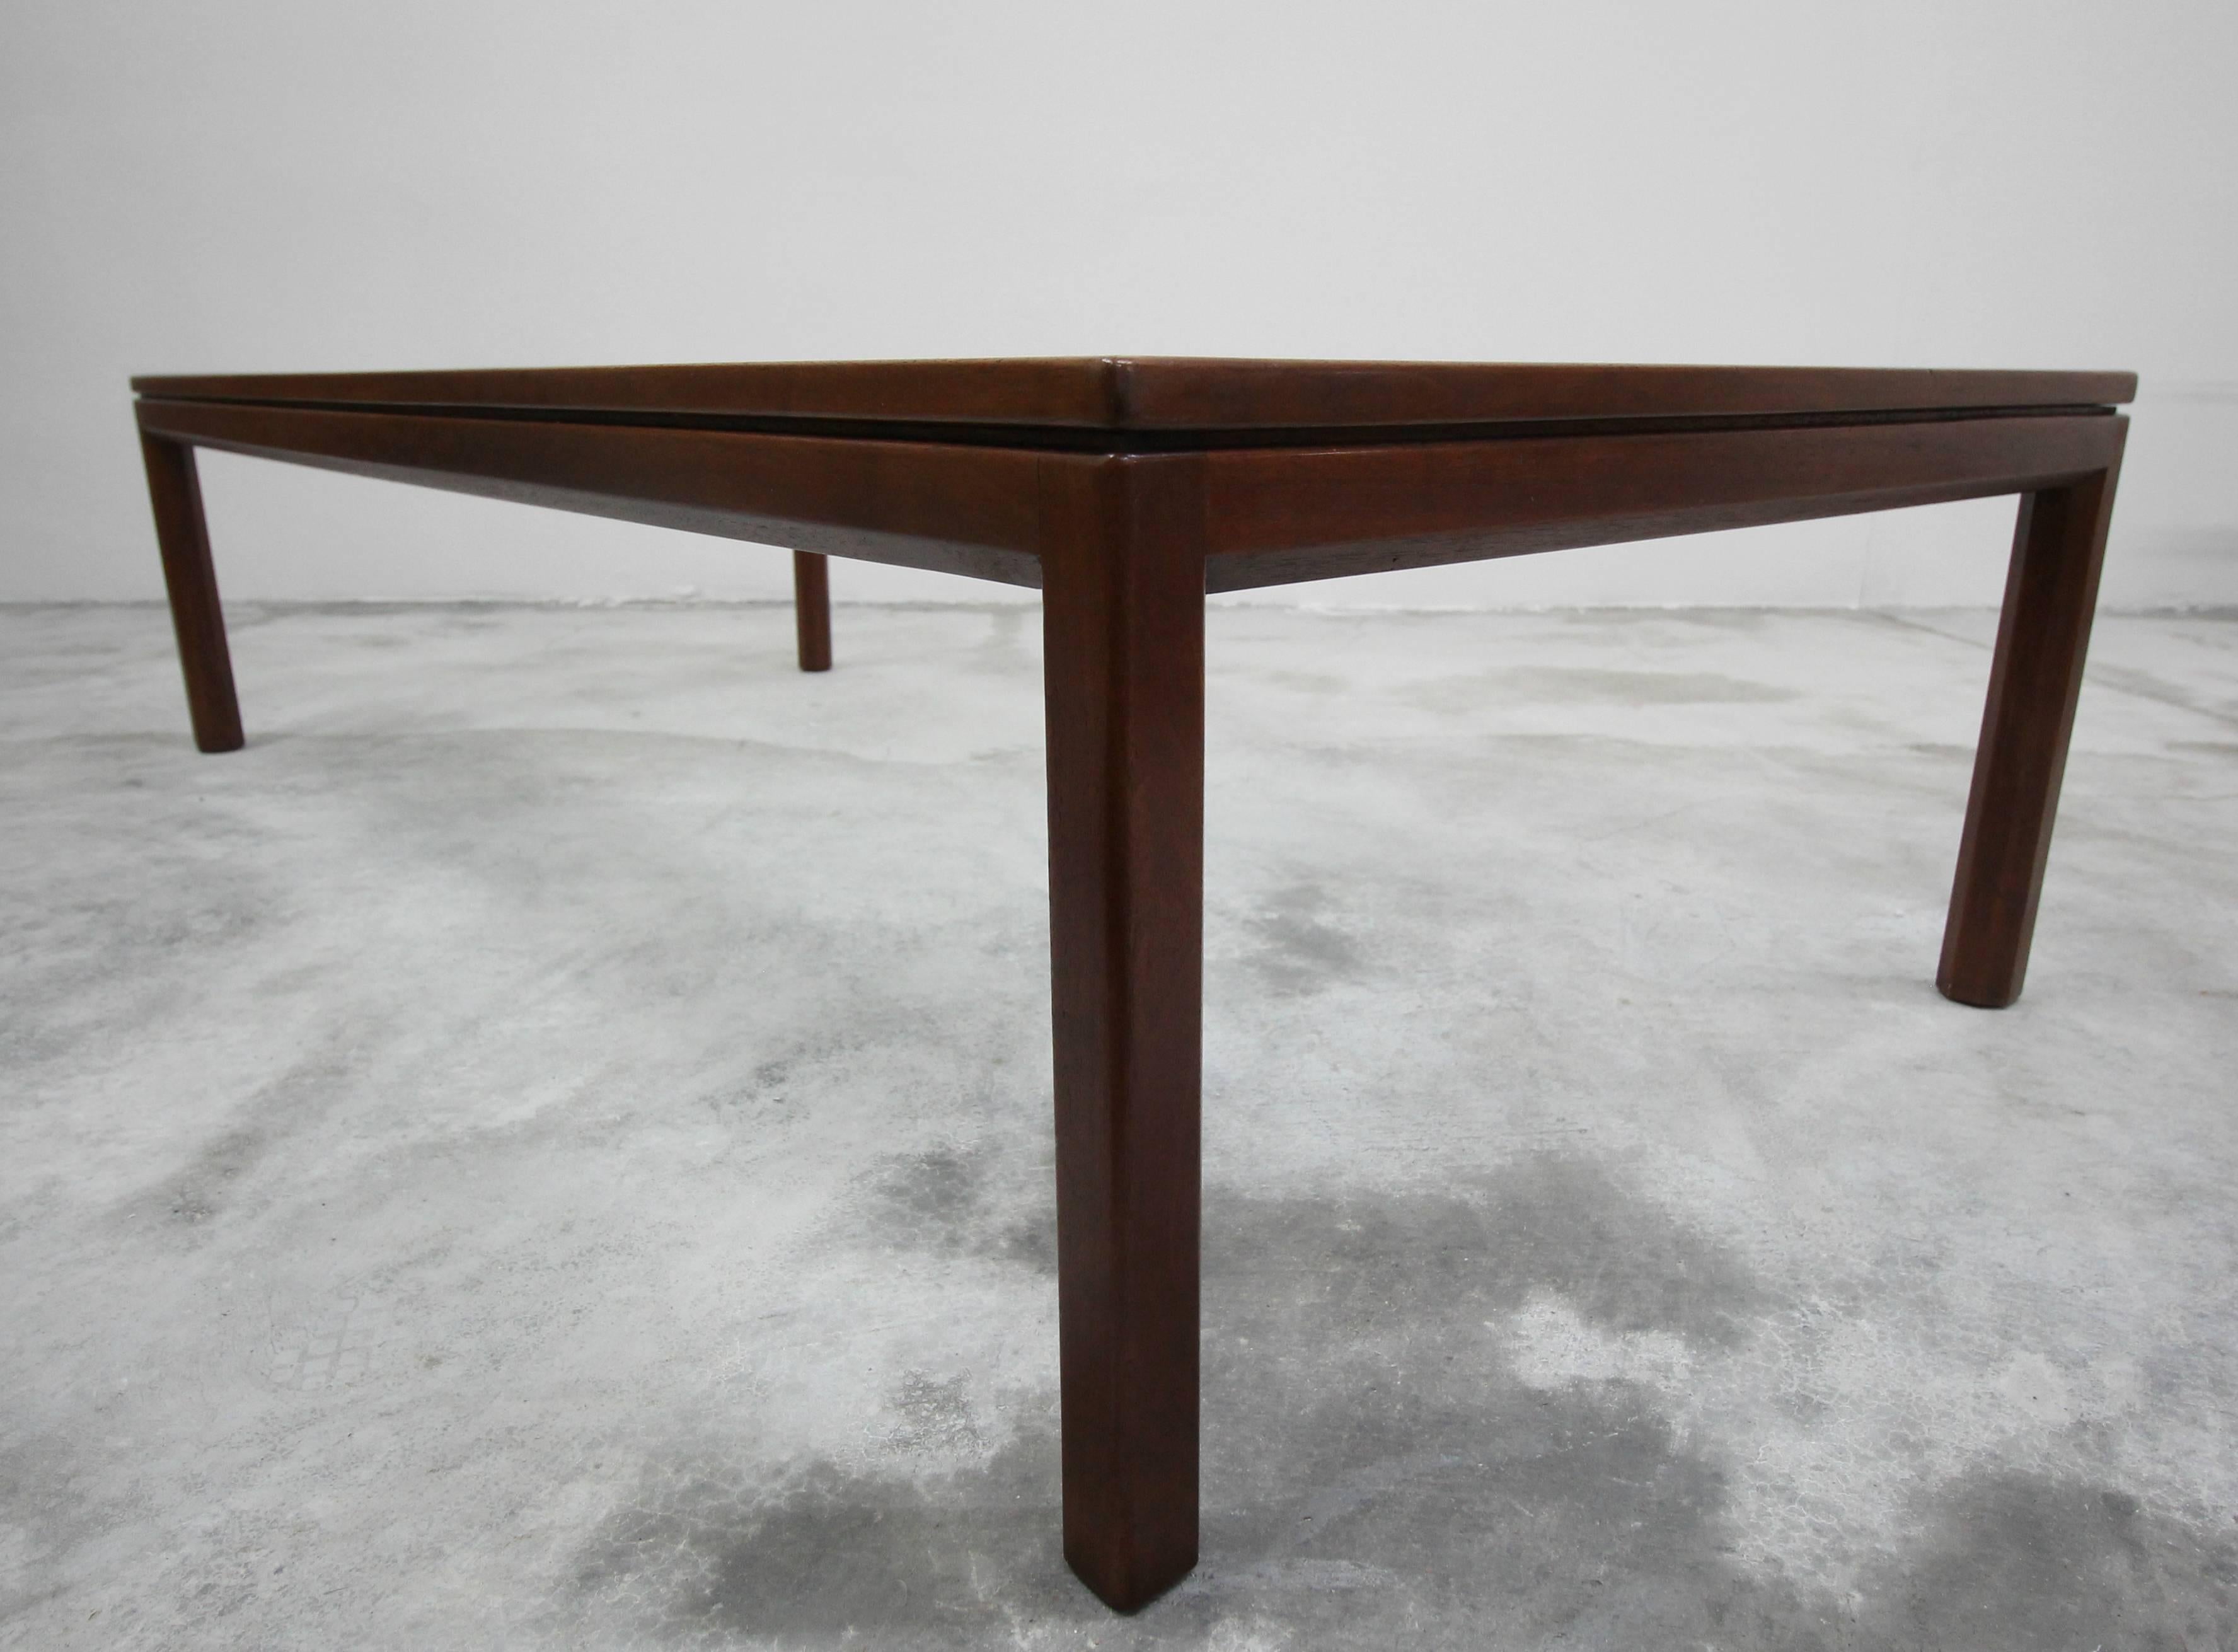 Midcentury Walnut and Glass Coffee Table by Edward Wormley for Dunbar 2